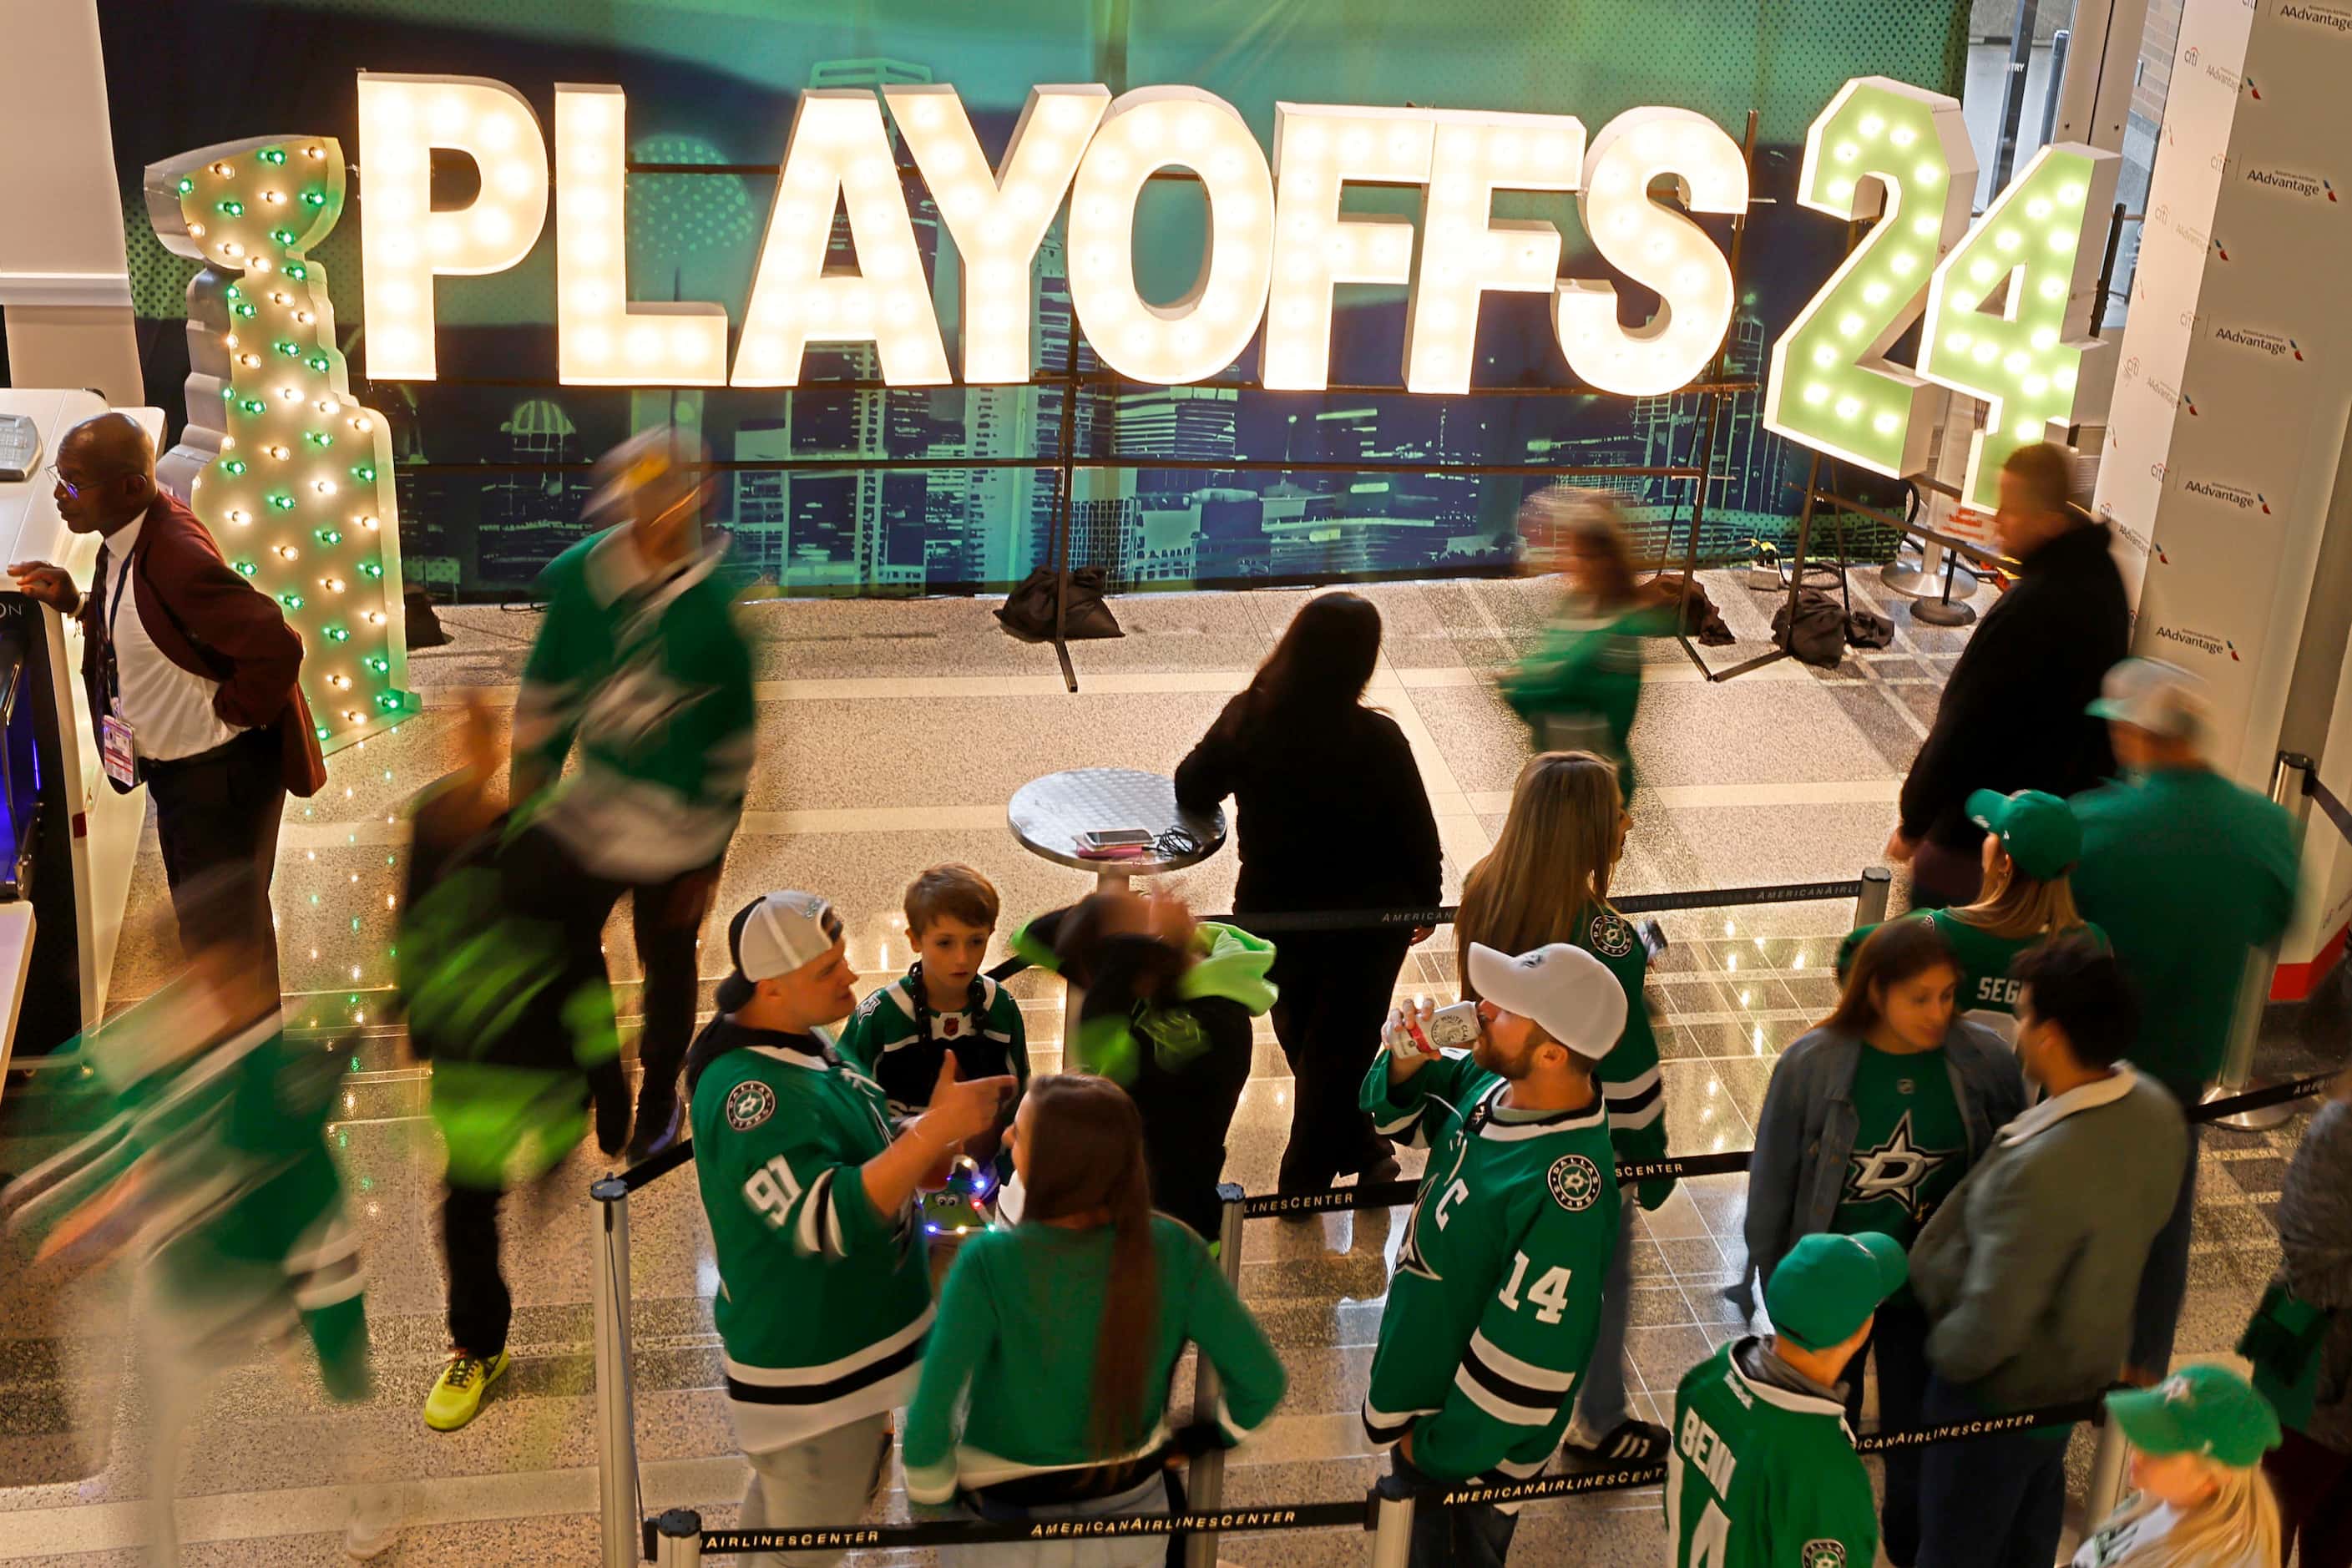 Fans line up for taking photos in front of “ Playoffs 24 ”sign before Game 2 of an NHL...